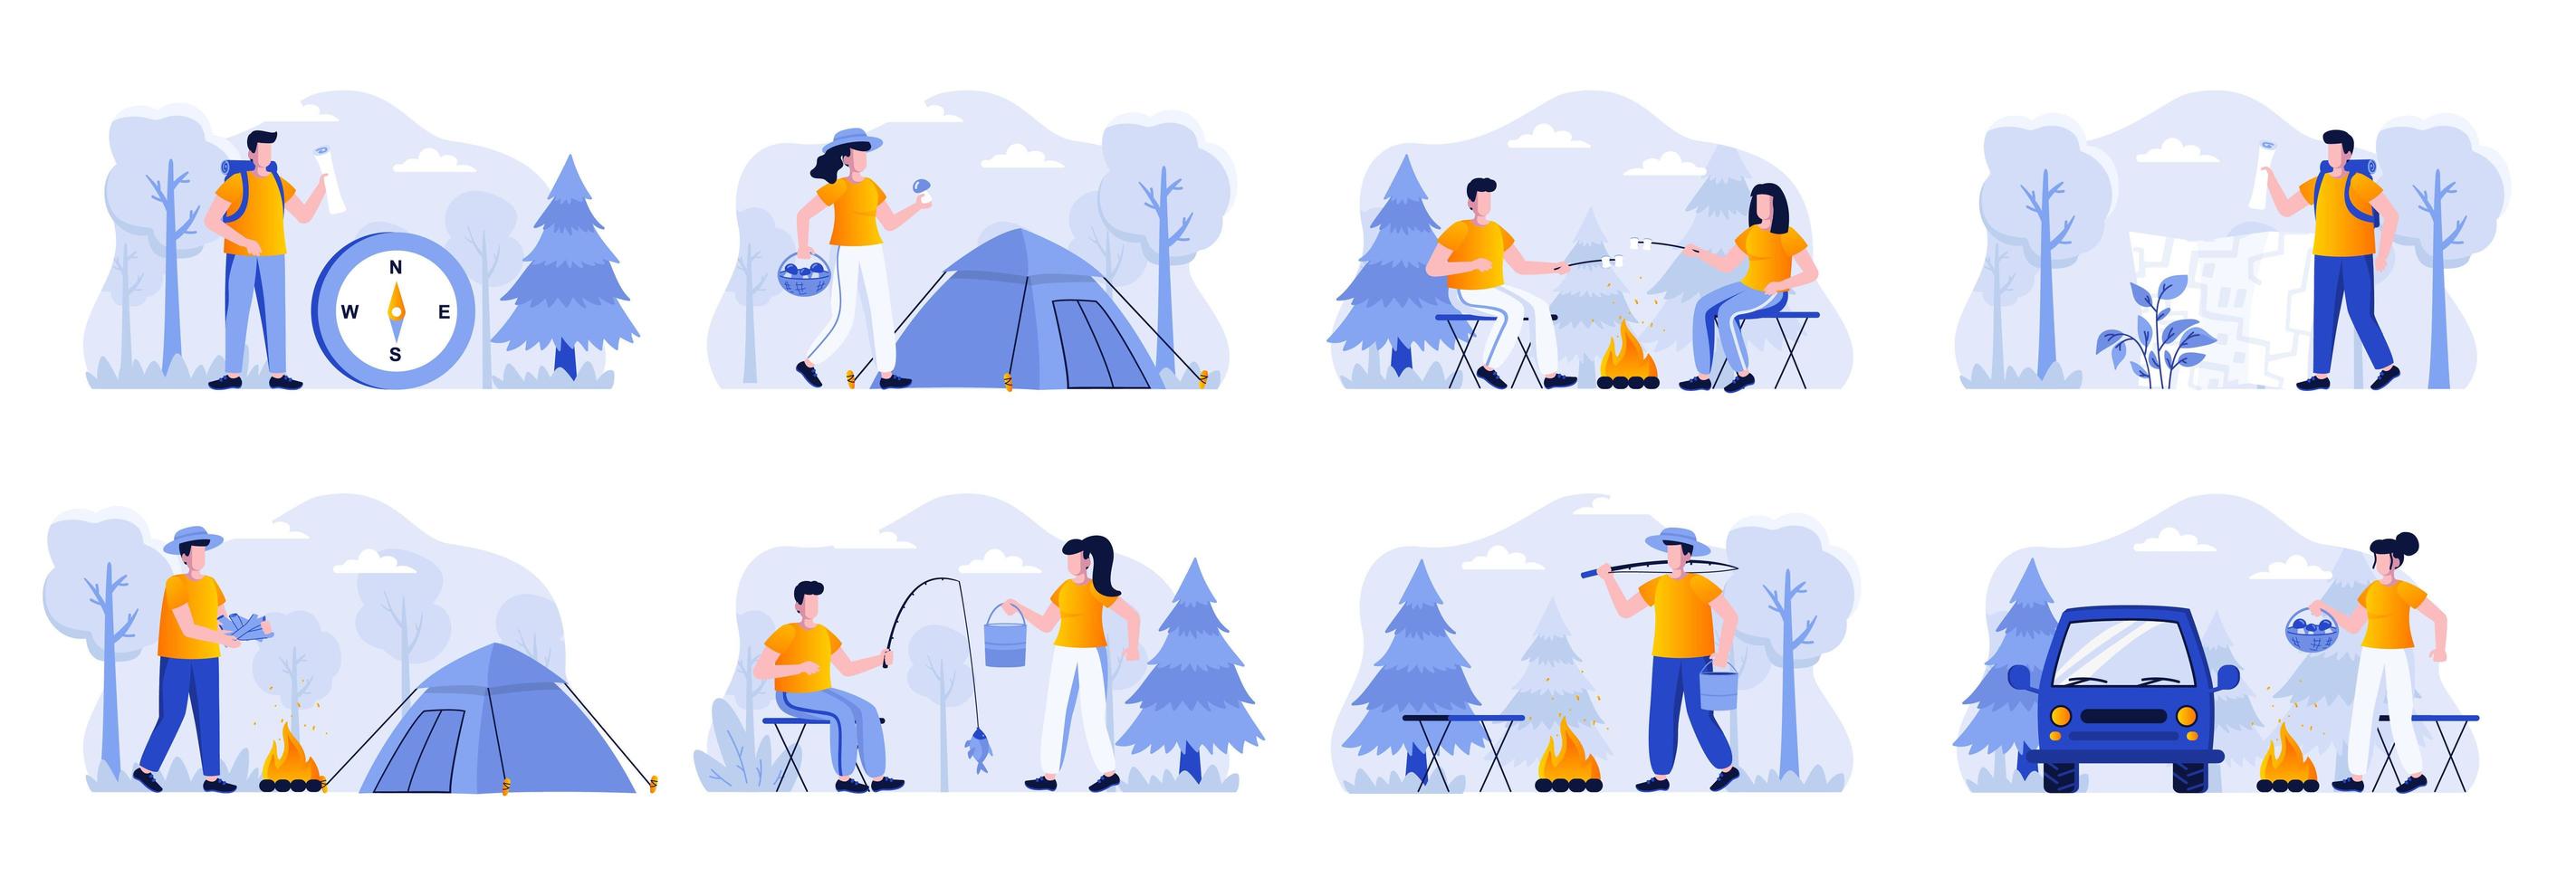 Camping scenes bundle with people characters vector